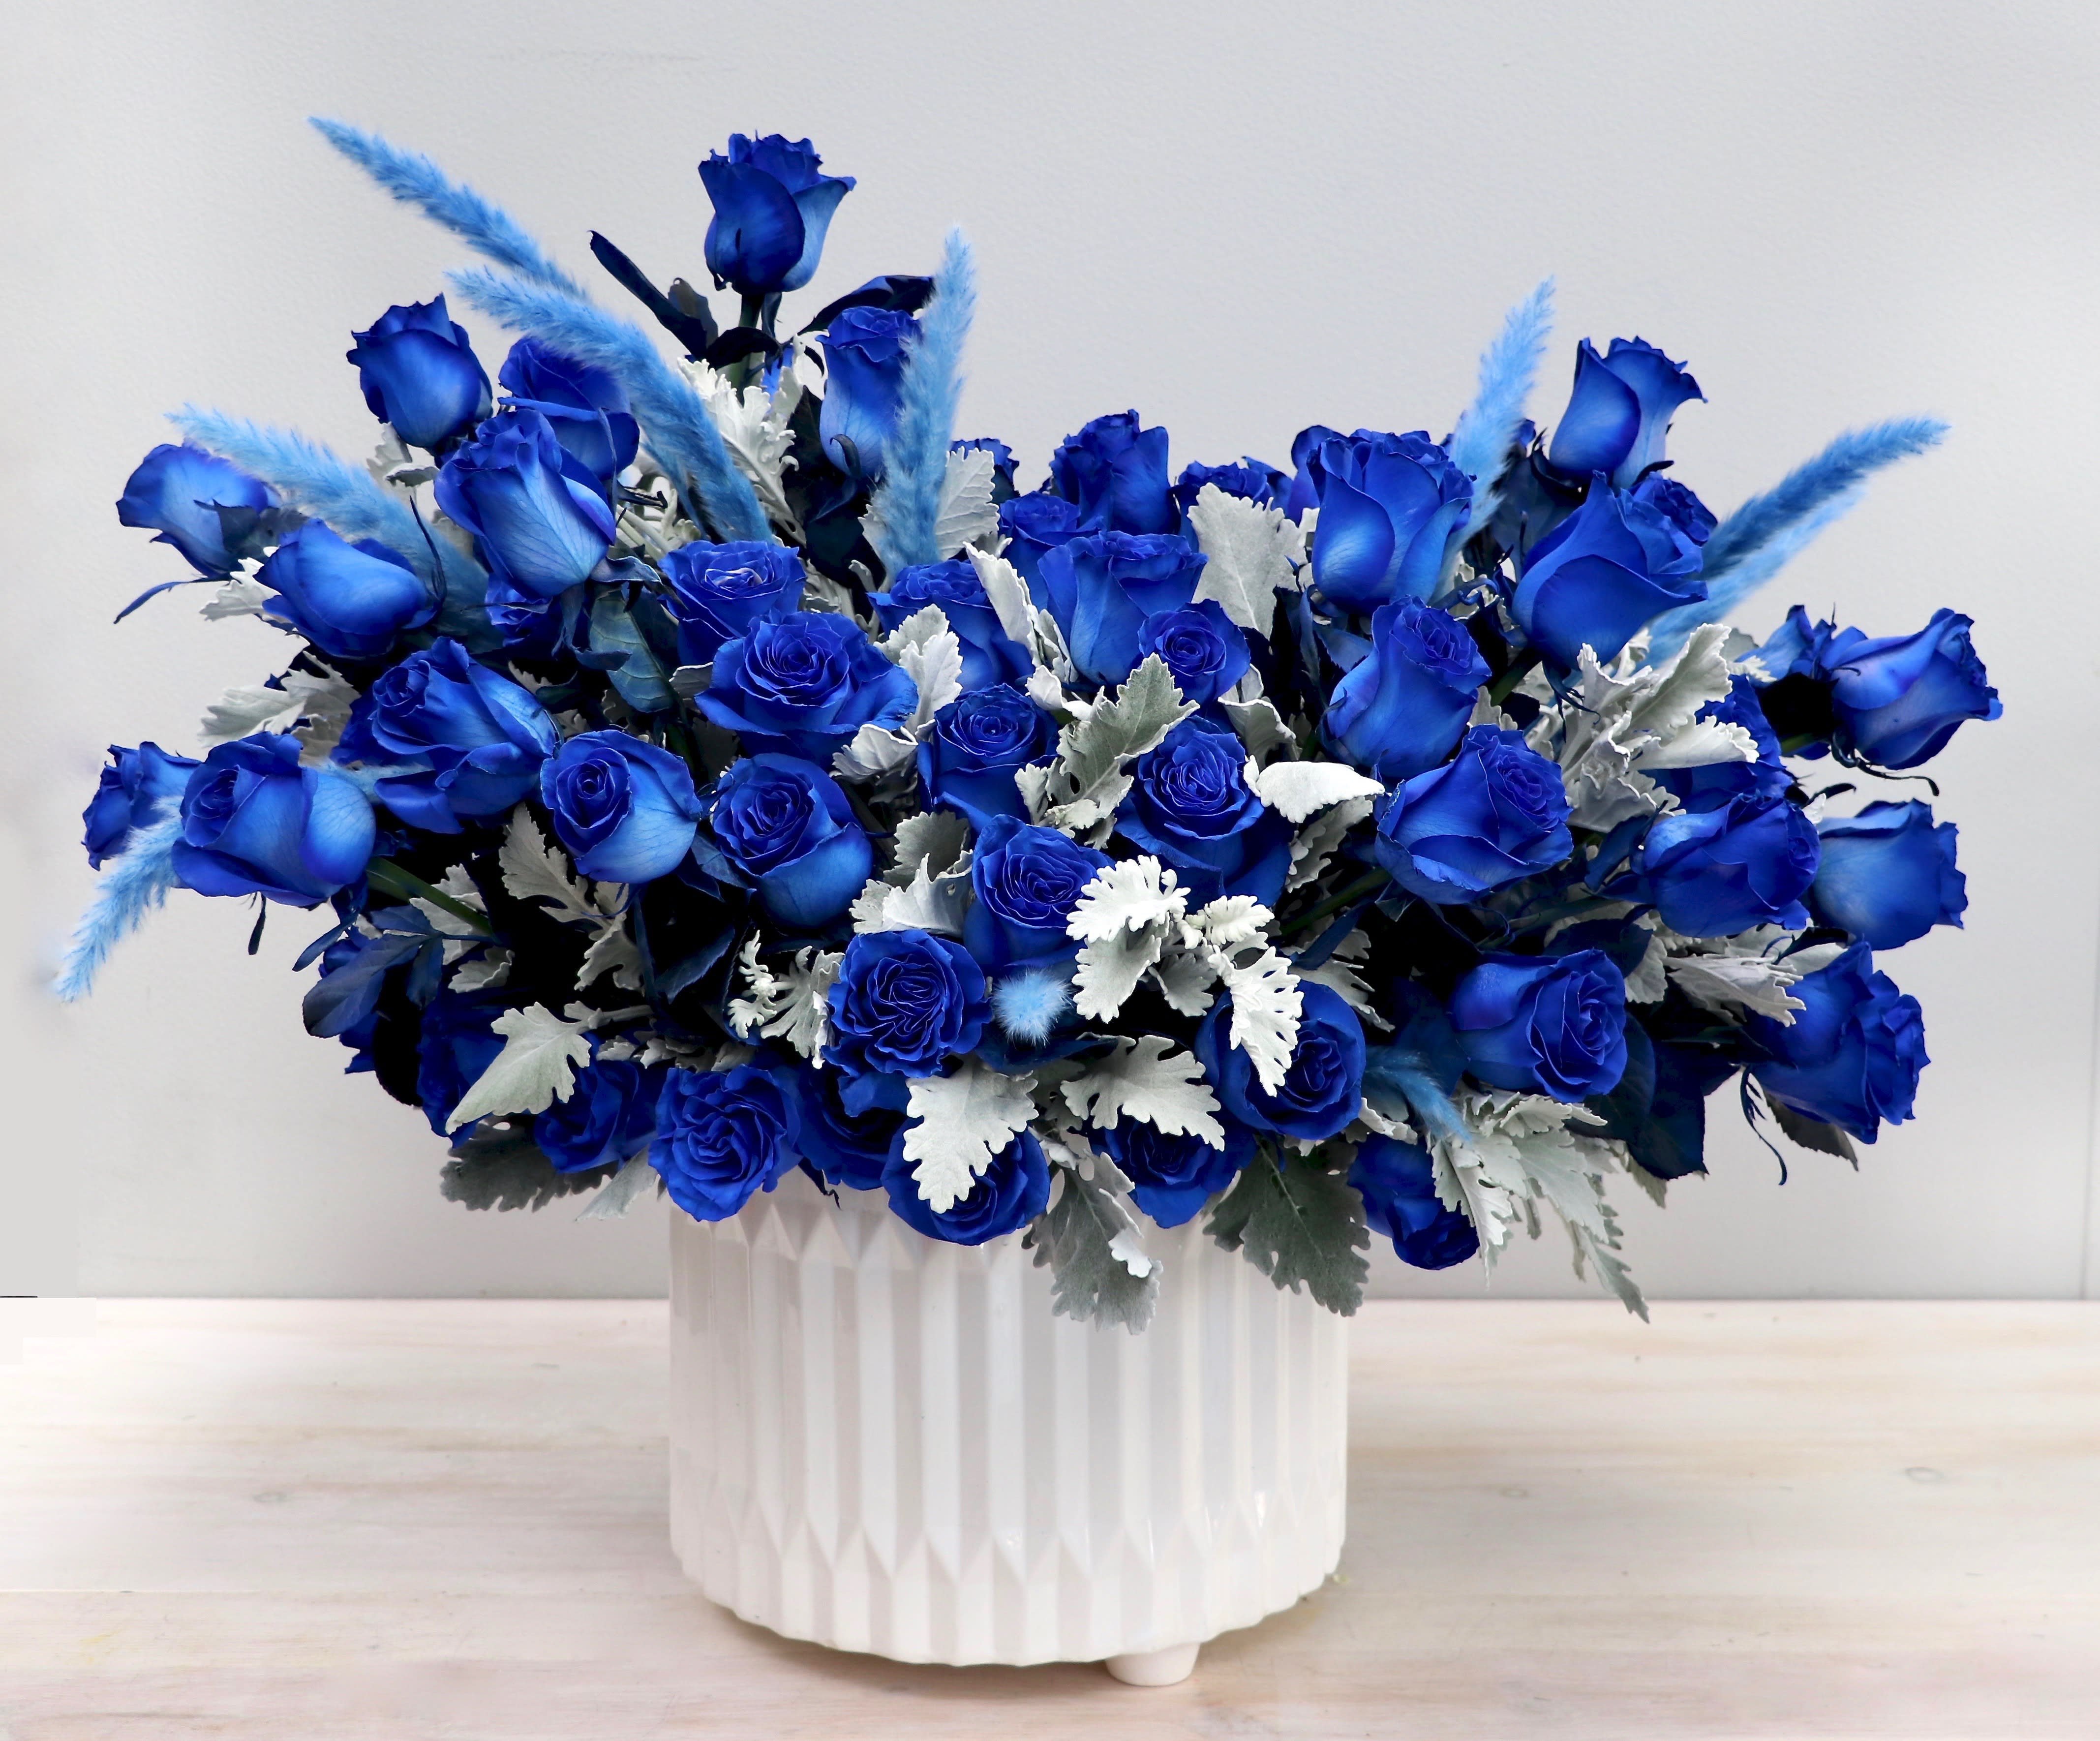 Rhythm and Blues - My Glendale Florist   - Don't miss out on this gorgeous arrangement featuring blue roses. The photo shown is displayed in the DELUXE size. Please order 24 hours in advance. 